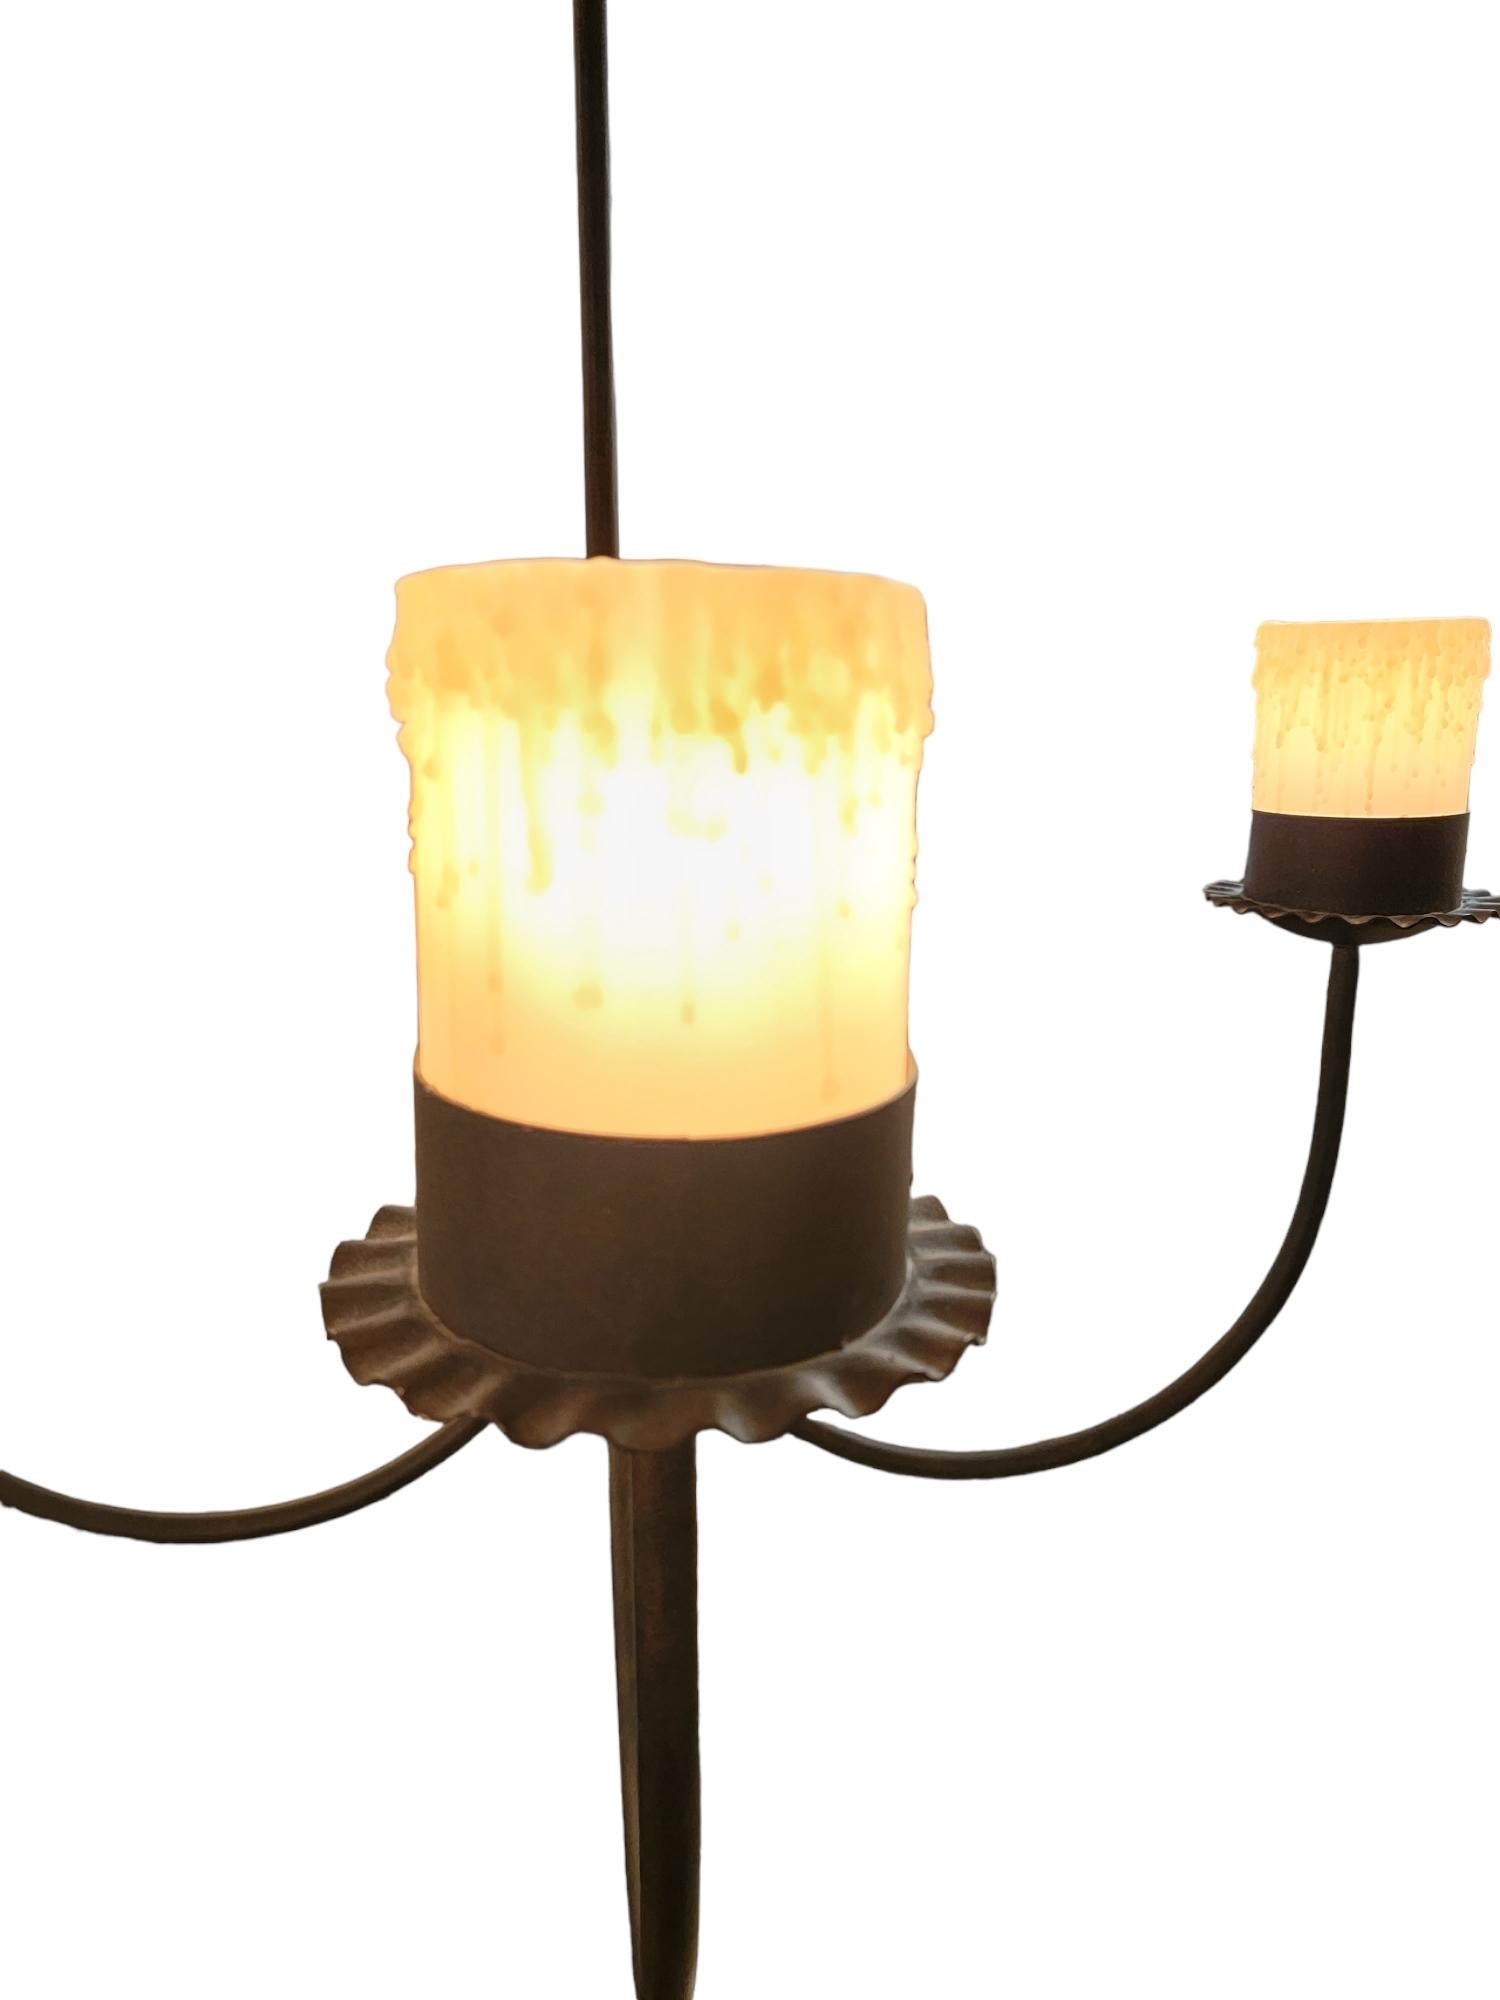 Iron 4 light 4 arm chandelier with wax candle shades with electrically lit lighting. The hook shaped arms extend generously outward and offer a glow through the wax shades when lit.